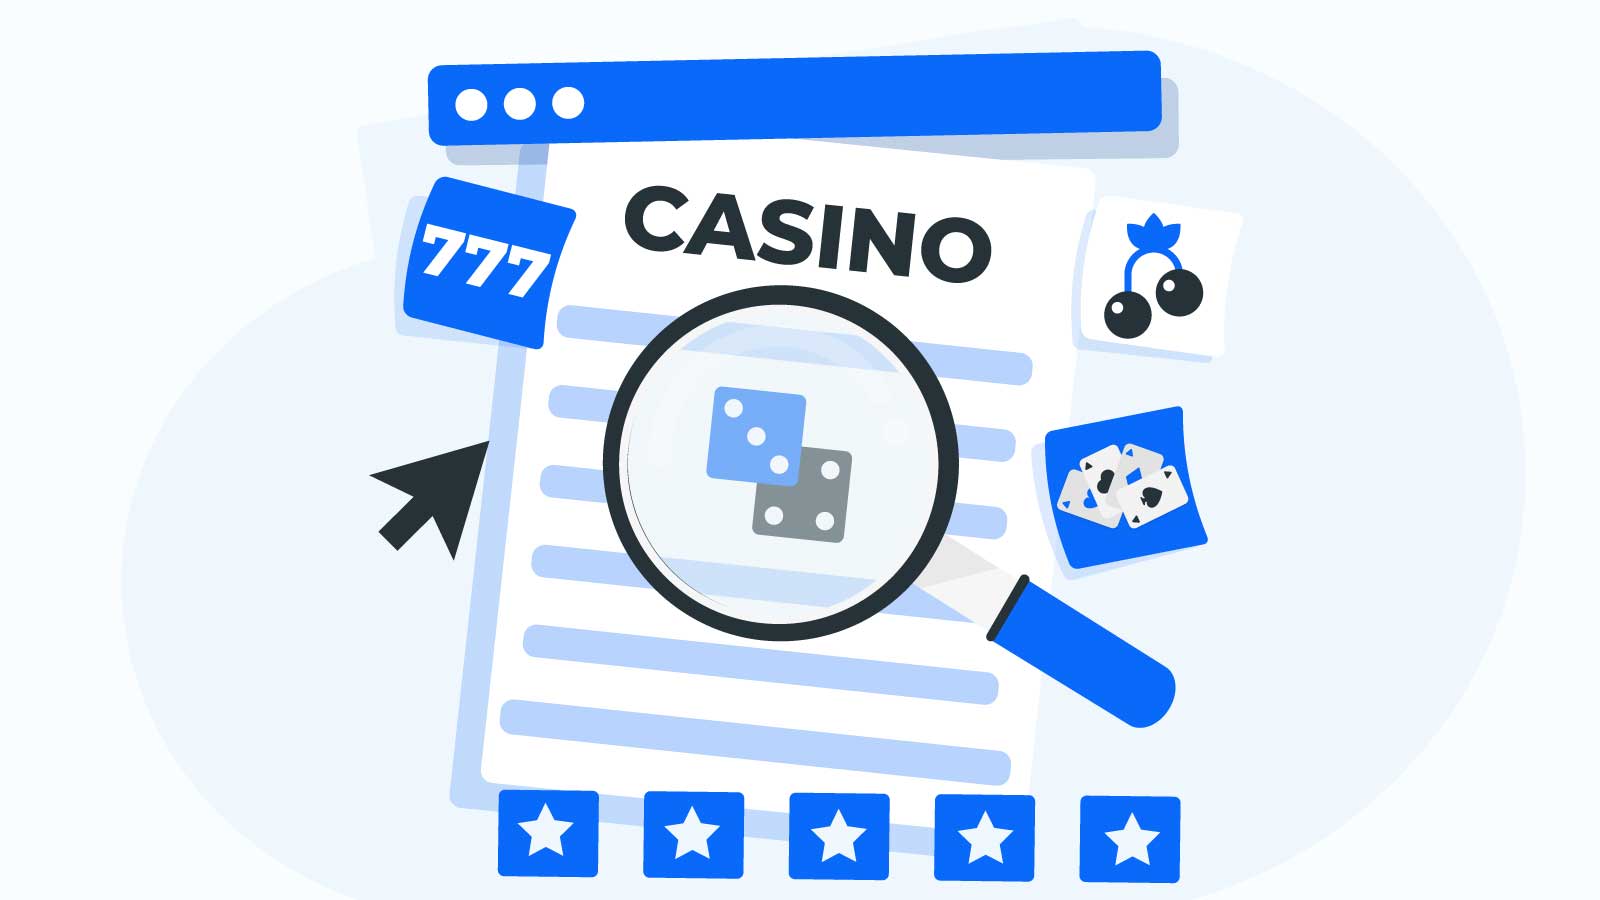 What is a casino review